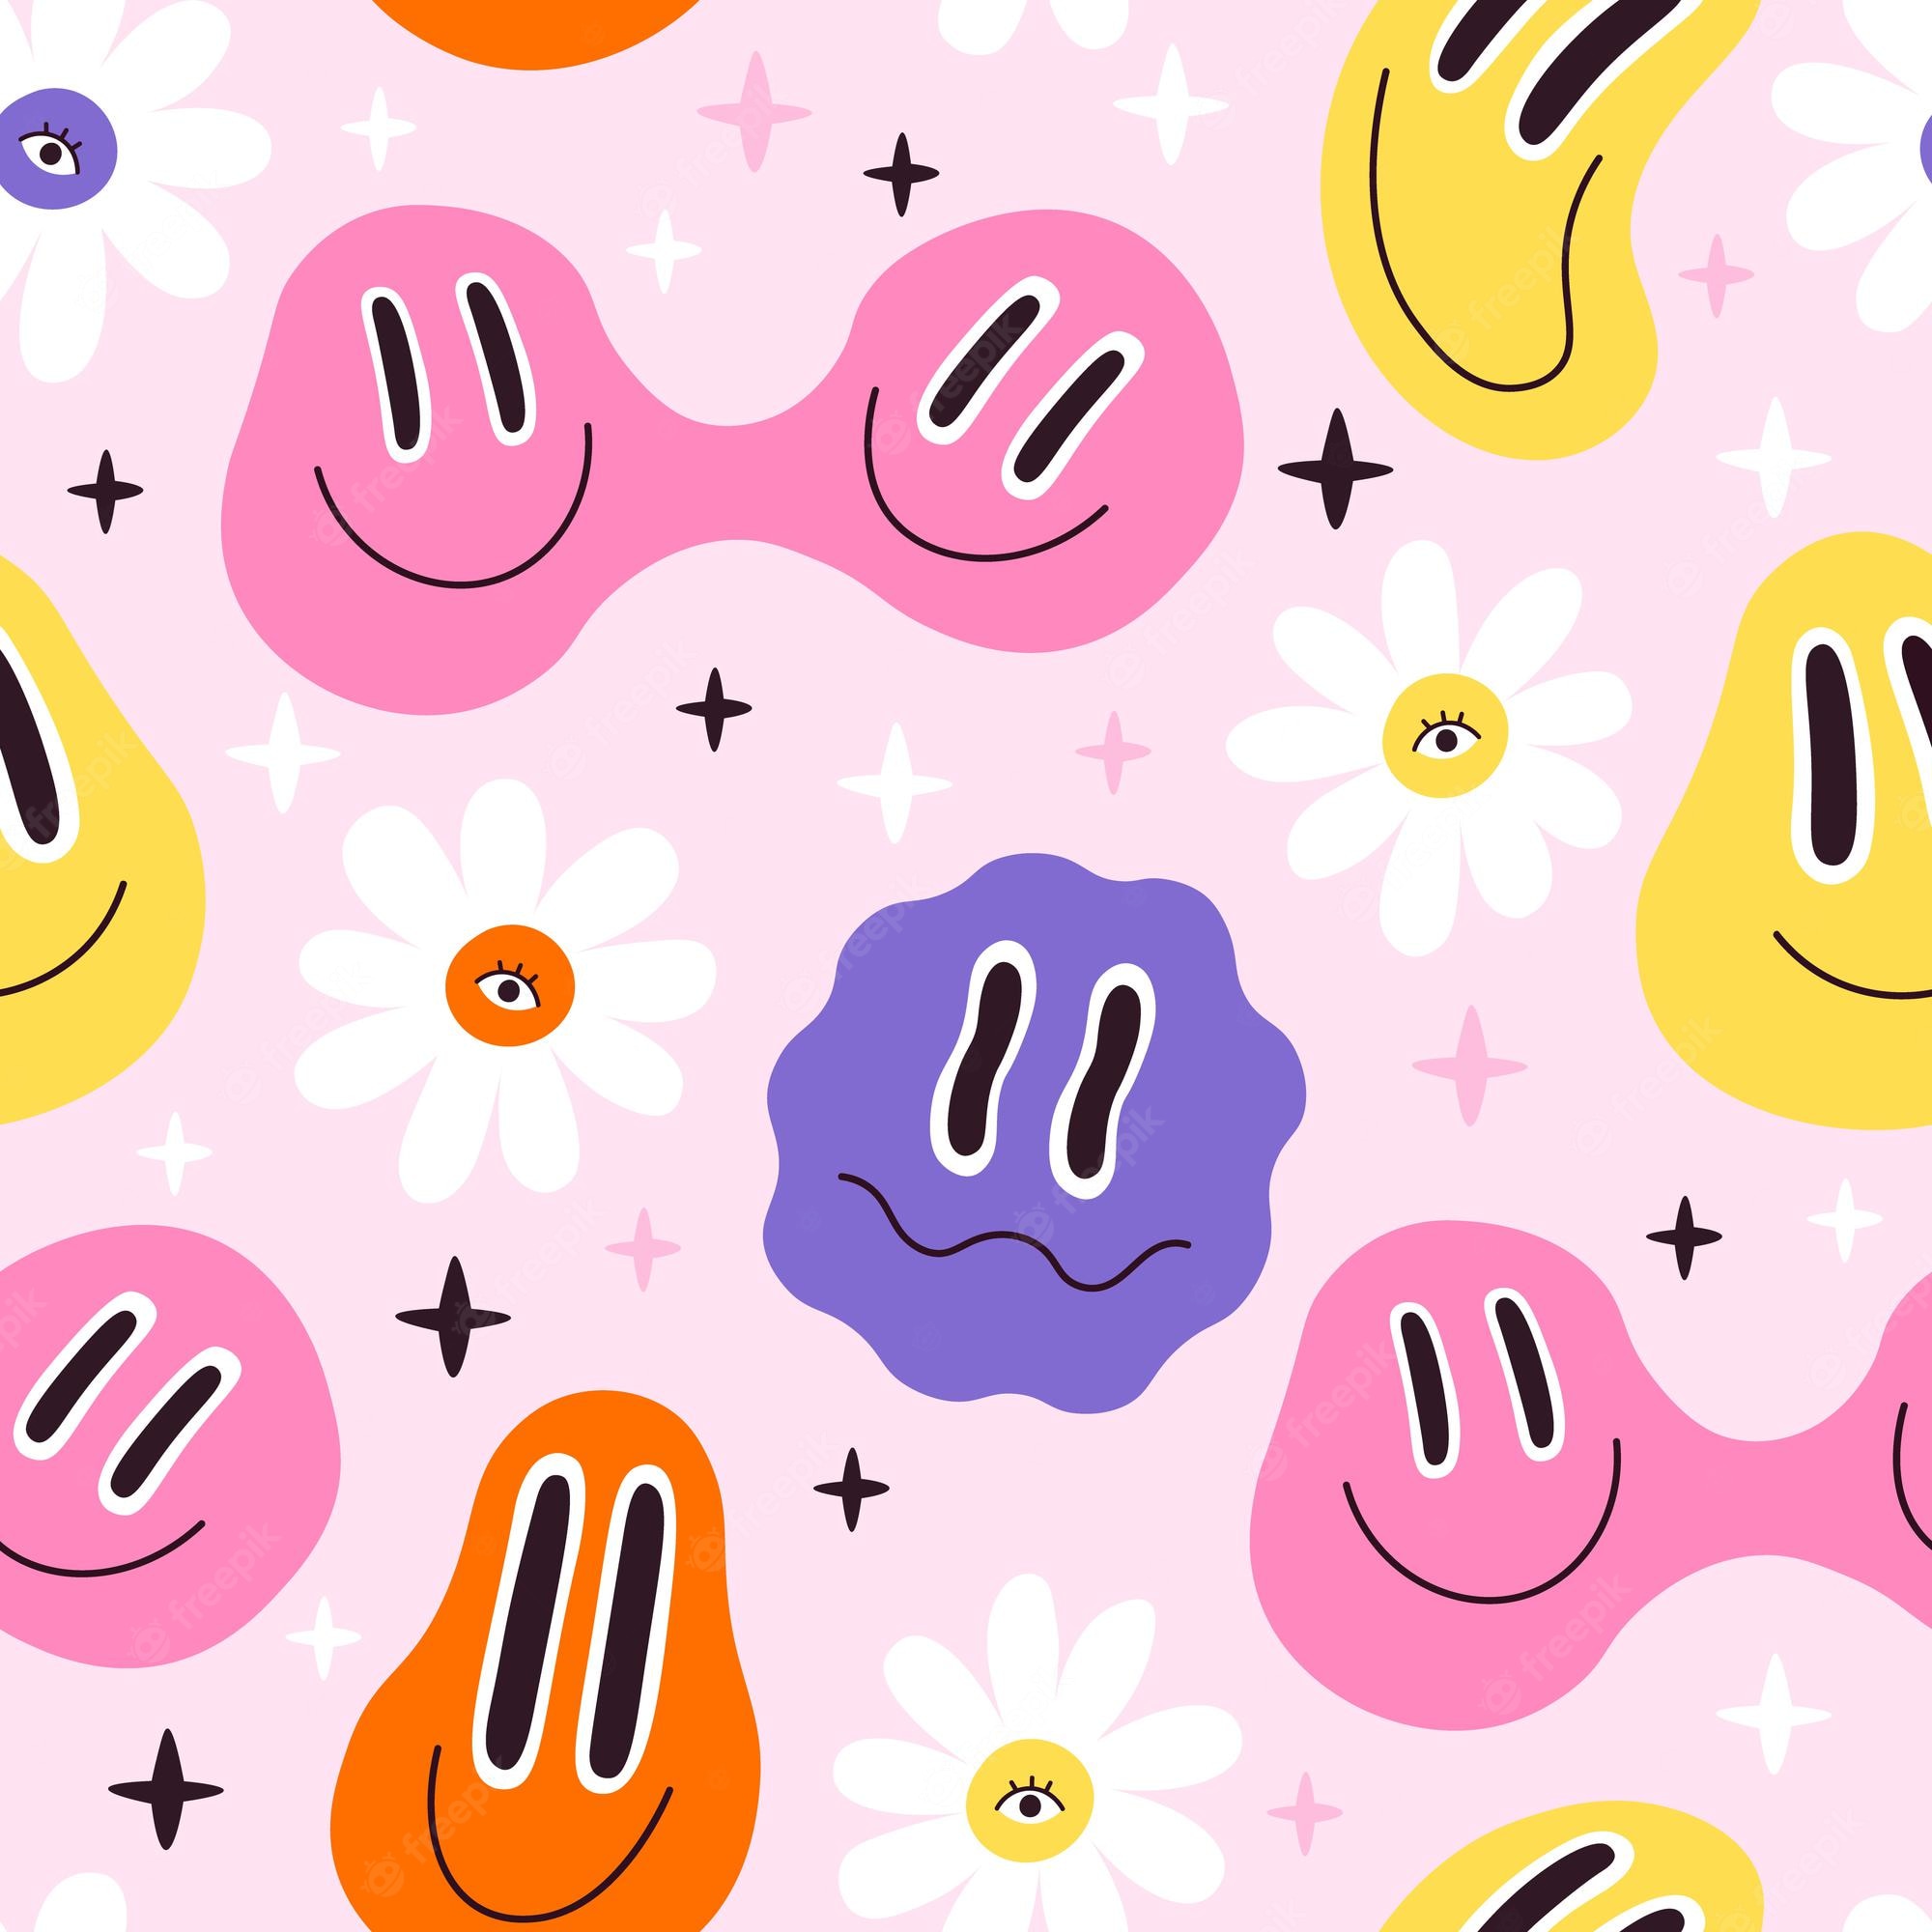 Premium Vector. Melted smiley faces and flowers, trippy seamless pattern. retro hippie psychedelic distorted emoji. lava lamp smiley face vector wallpaper